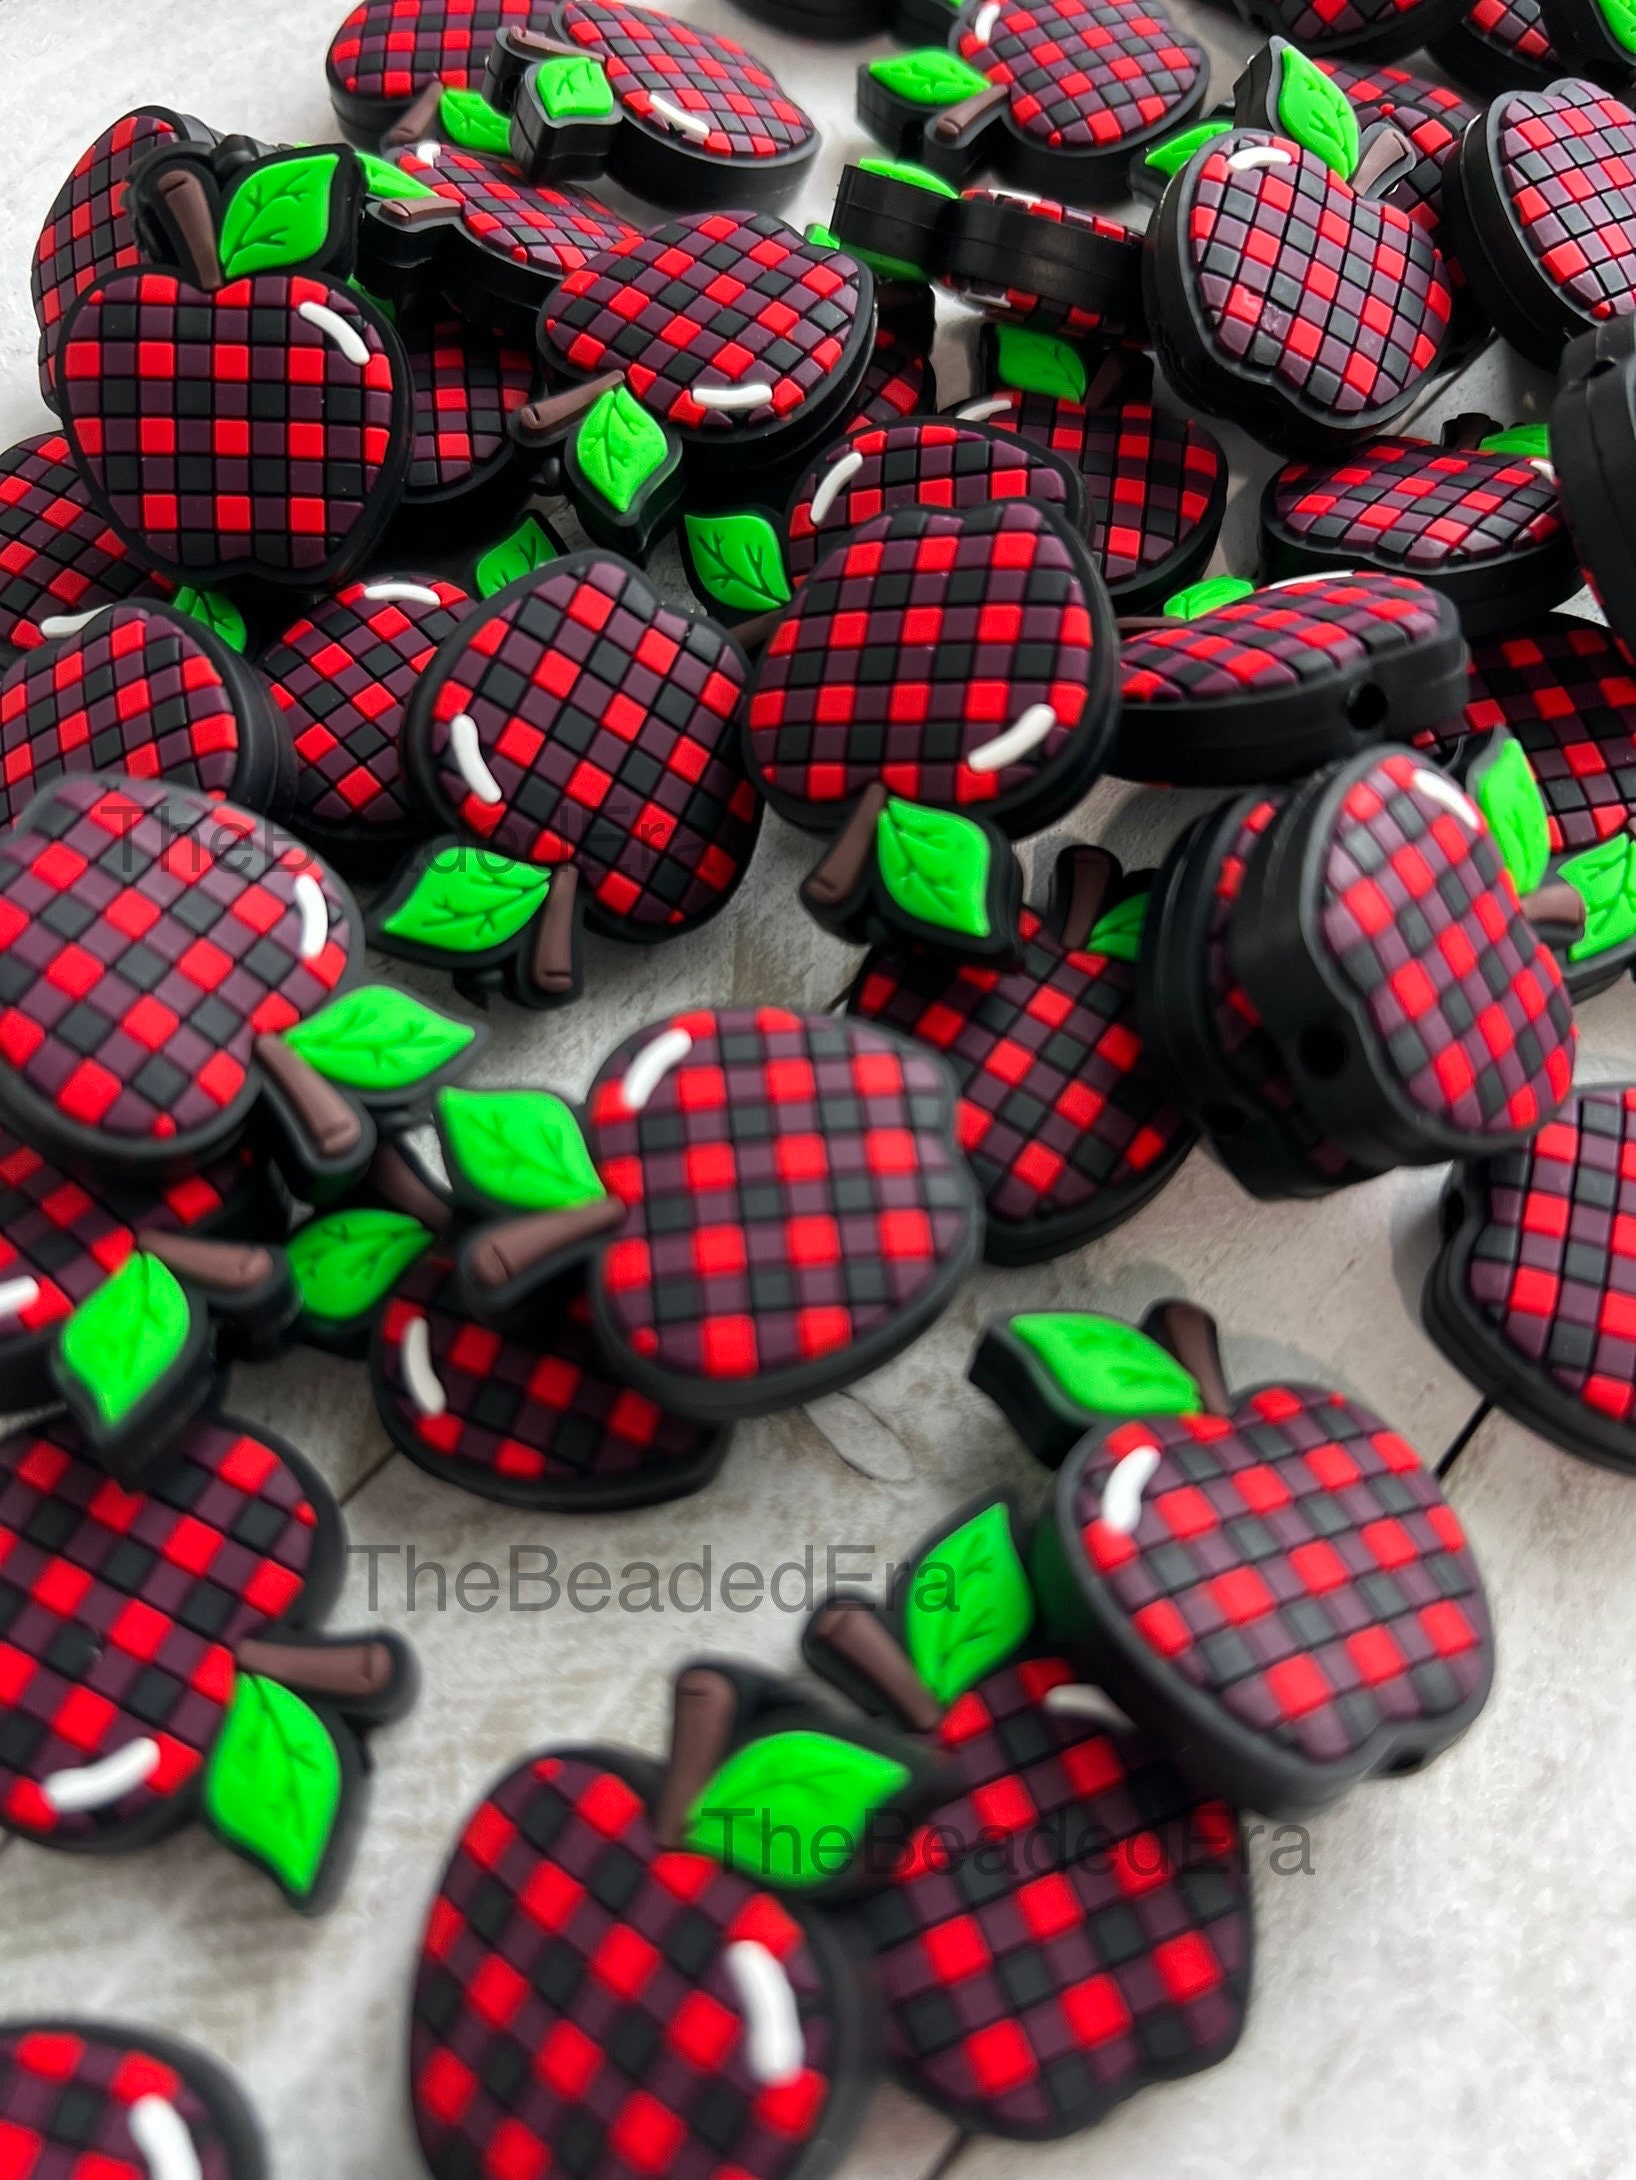 New Design Black White Plaid Silicone Beads, 12/15mm Silicone Beads, Bulk  Round Silicone Beads, Craft Loose Beads, DIY Jewelry Accessories 